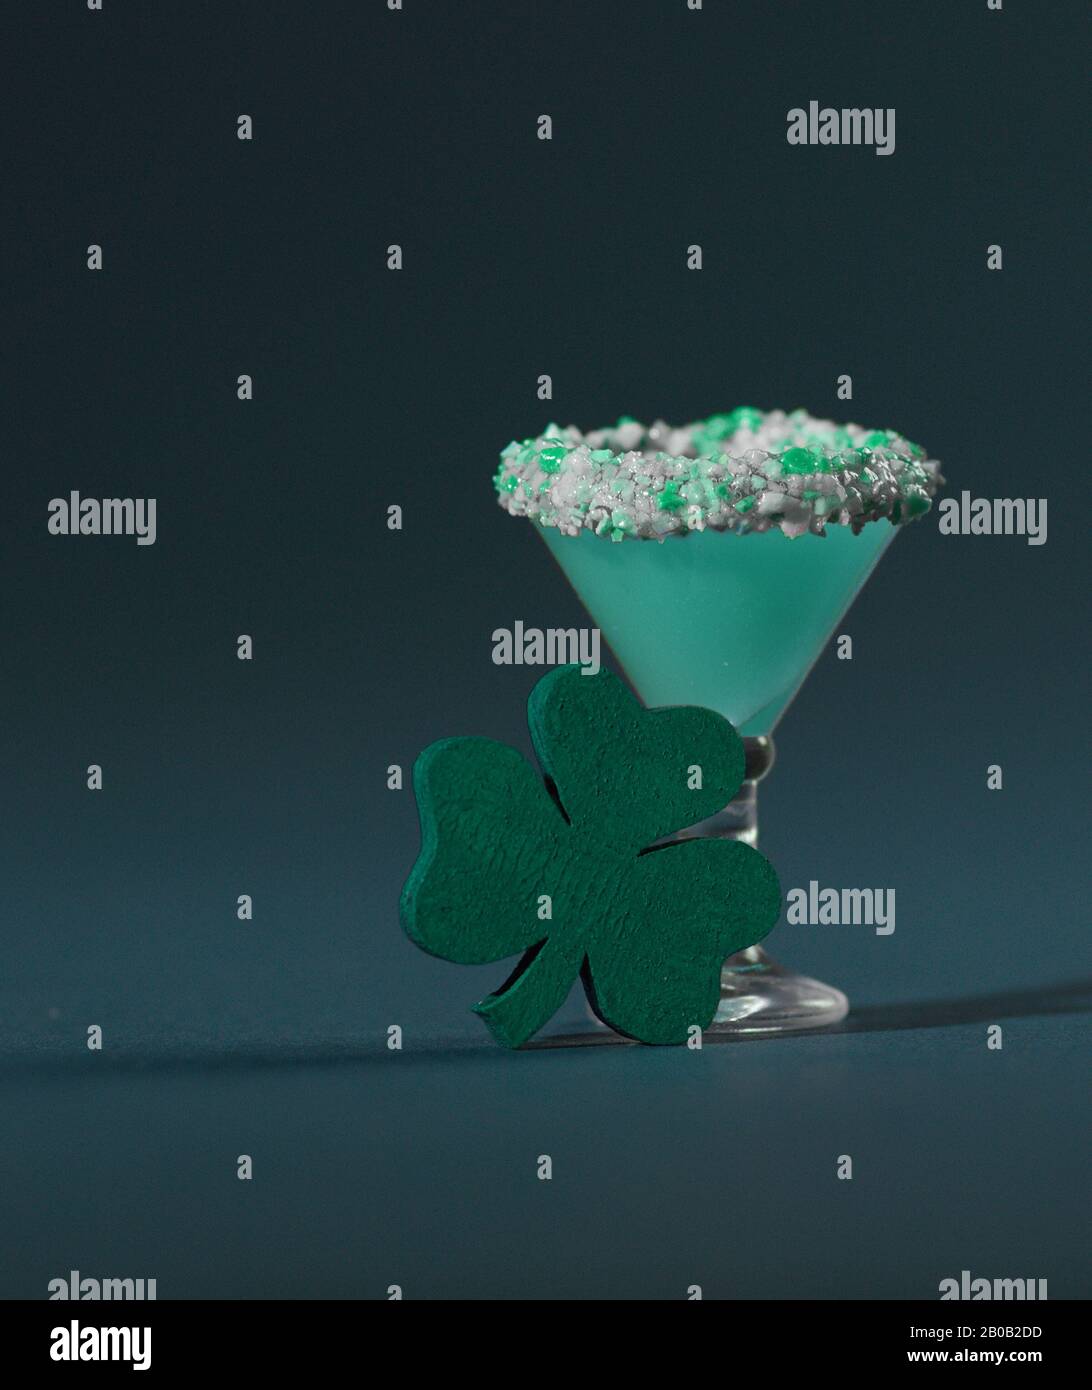 St. Patrick's Green, Sugar Rimmed, Confetti Cocktail with Wooden Shamrock Stock Photo